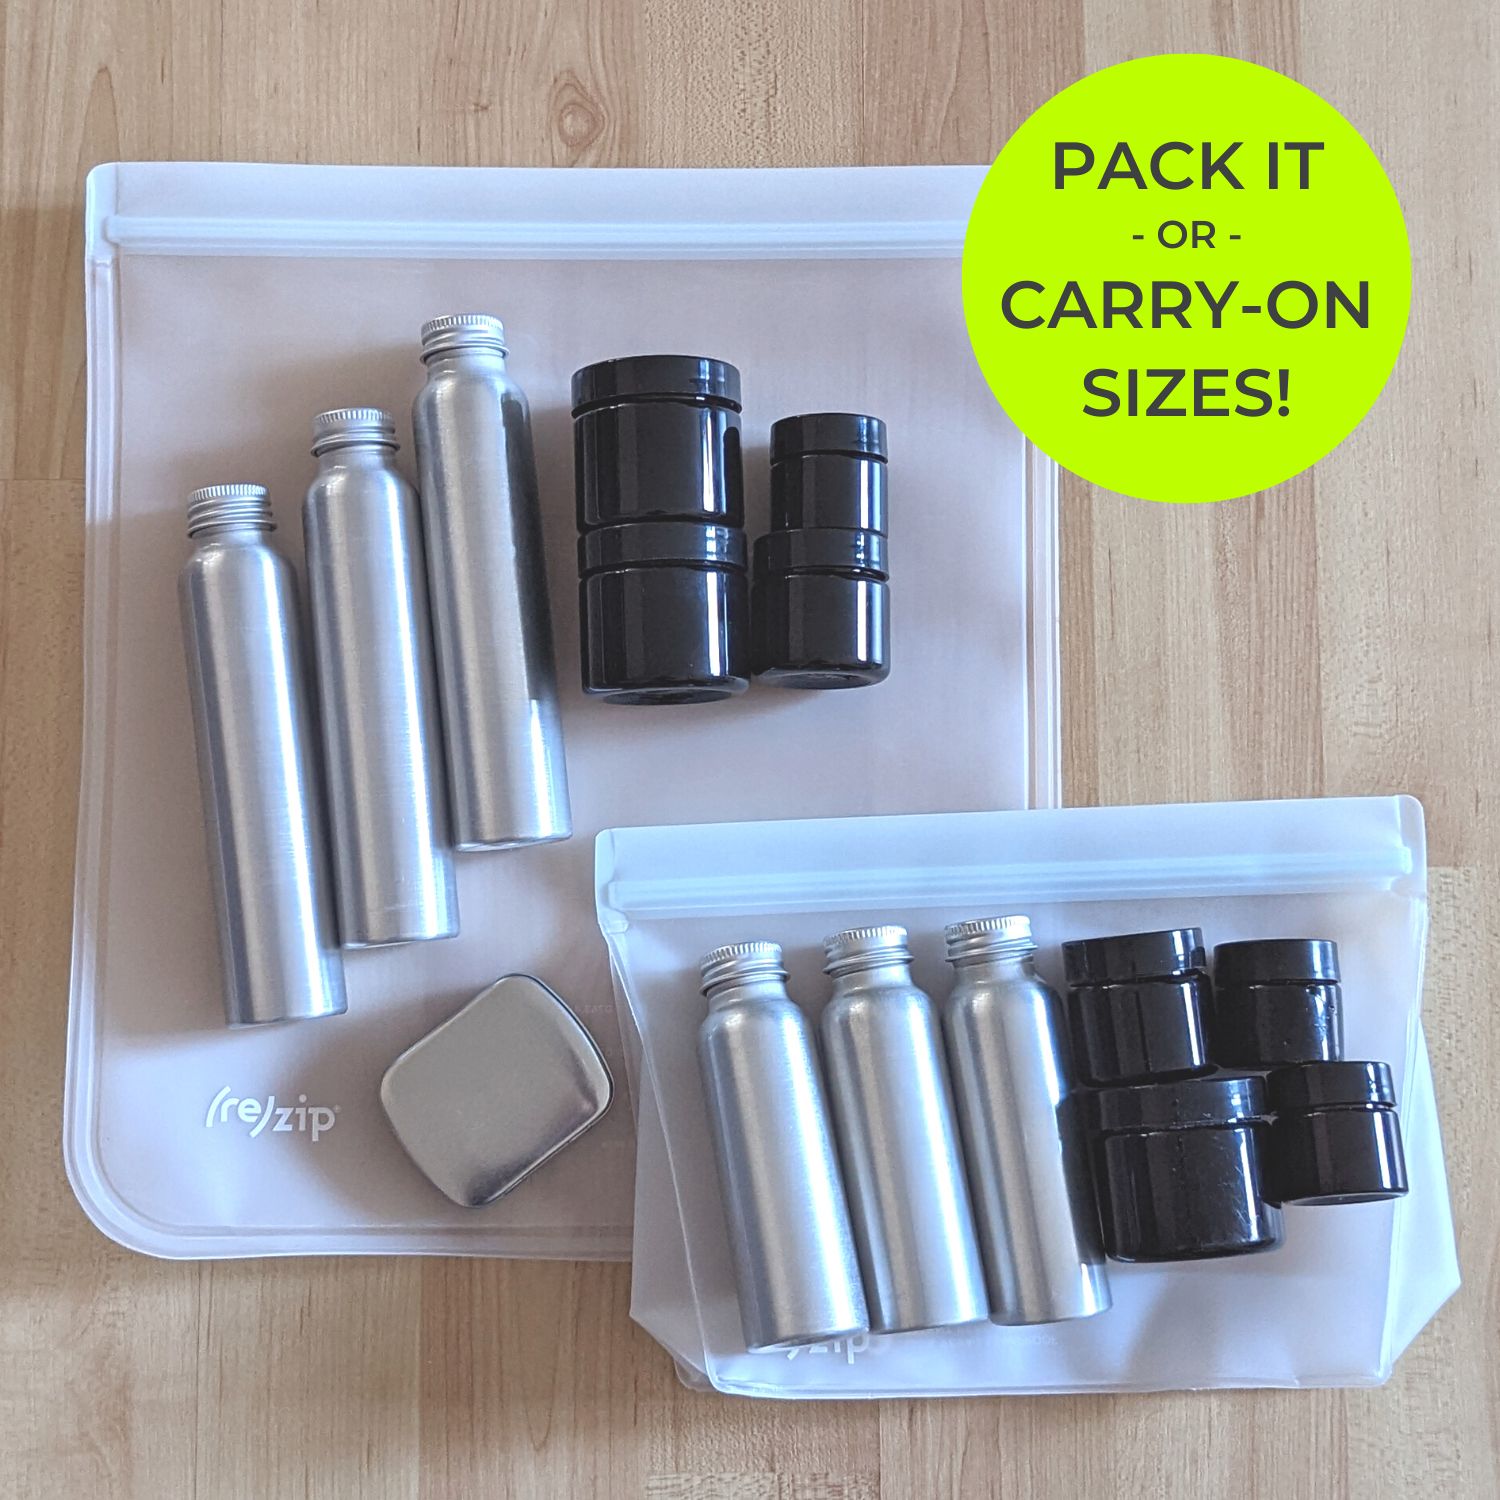 Leak Proof Travel Bottle Set (6 Pack), TSA Approved Airline Carry - On with  Clear Bags for Women